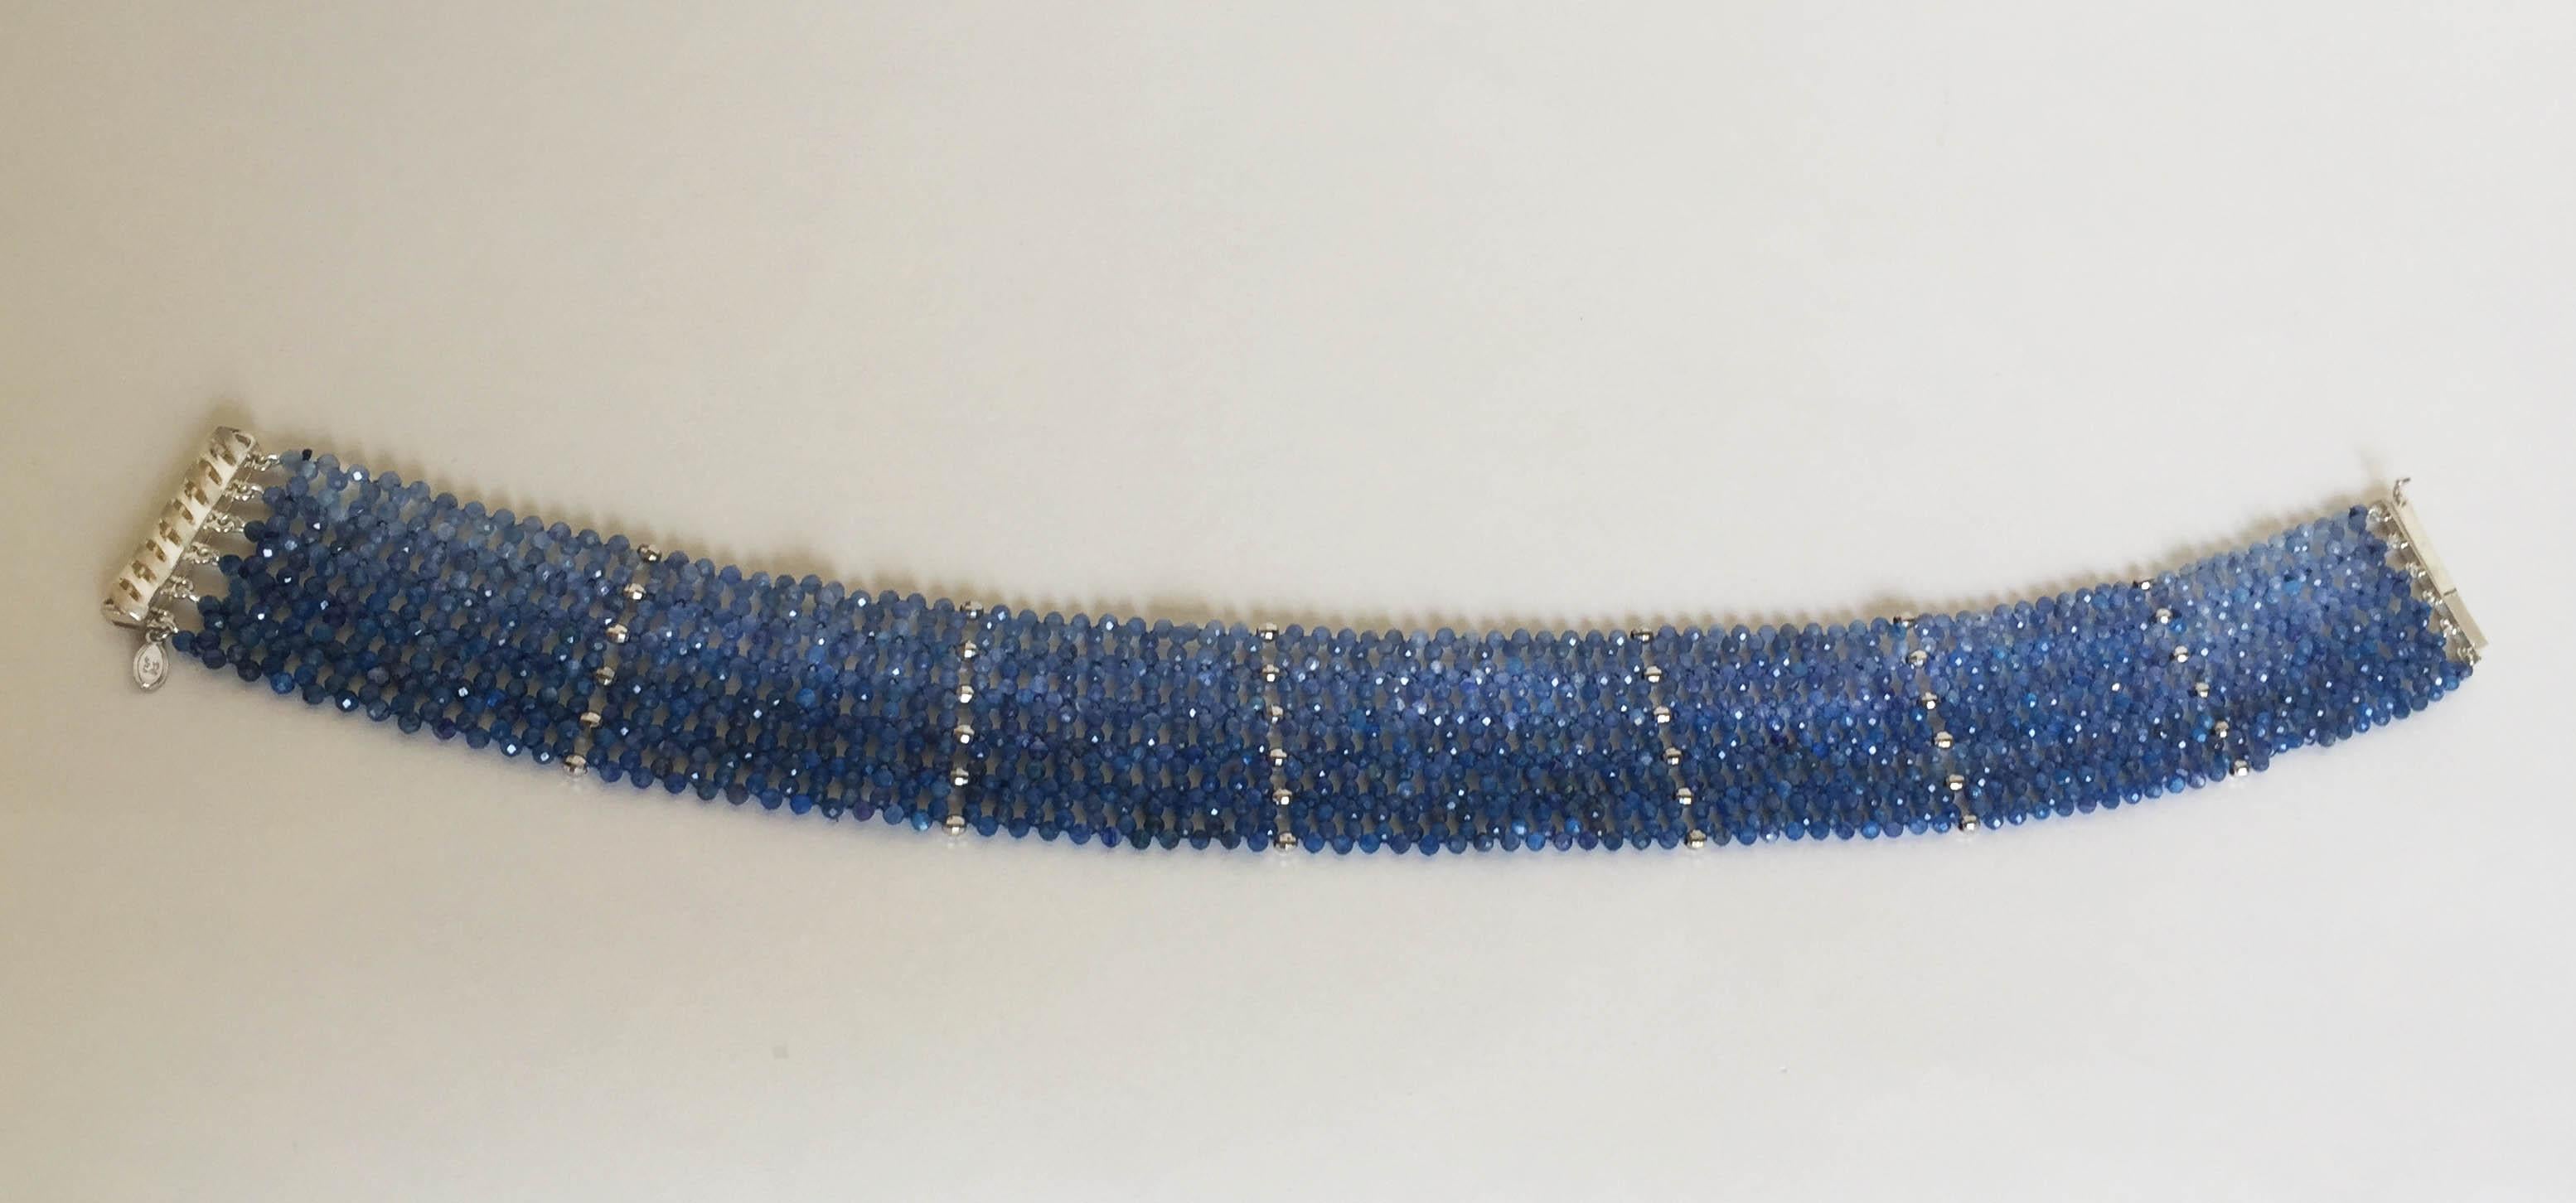 Woven Kyanite Beaded Choker with Sterling Silver Beads and Clasp 2